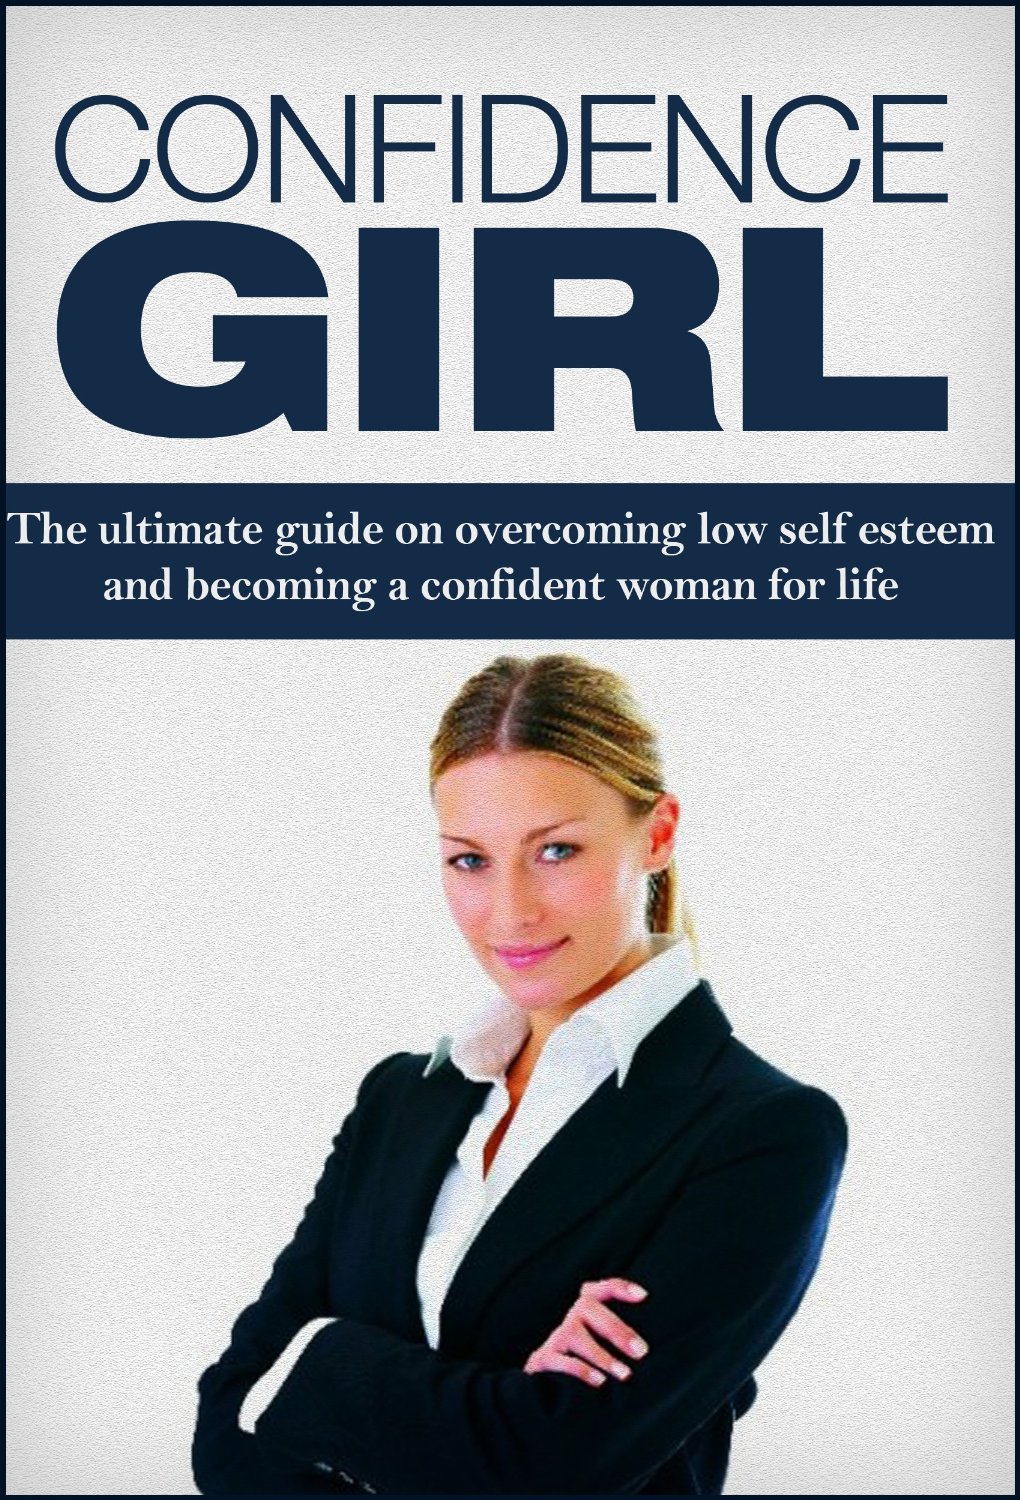 Confidence Girl: The Ultimate Guide On Overcoming Low Self-Esteem And Becoming A Confident Woman For Life by Amia Rilings